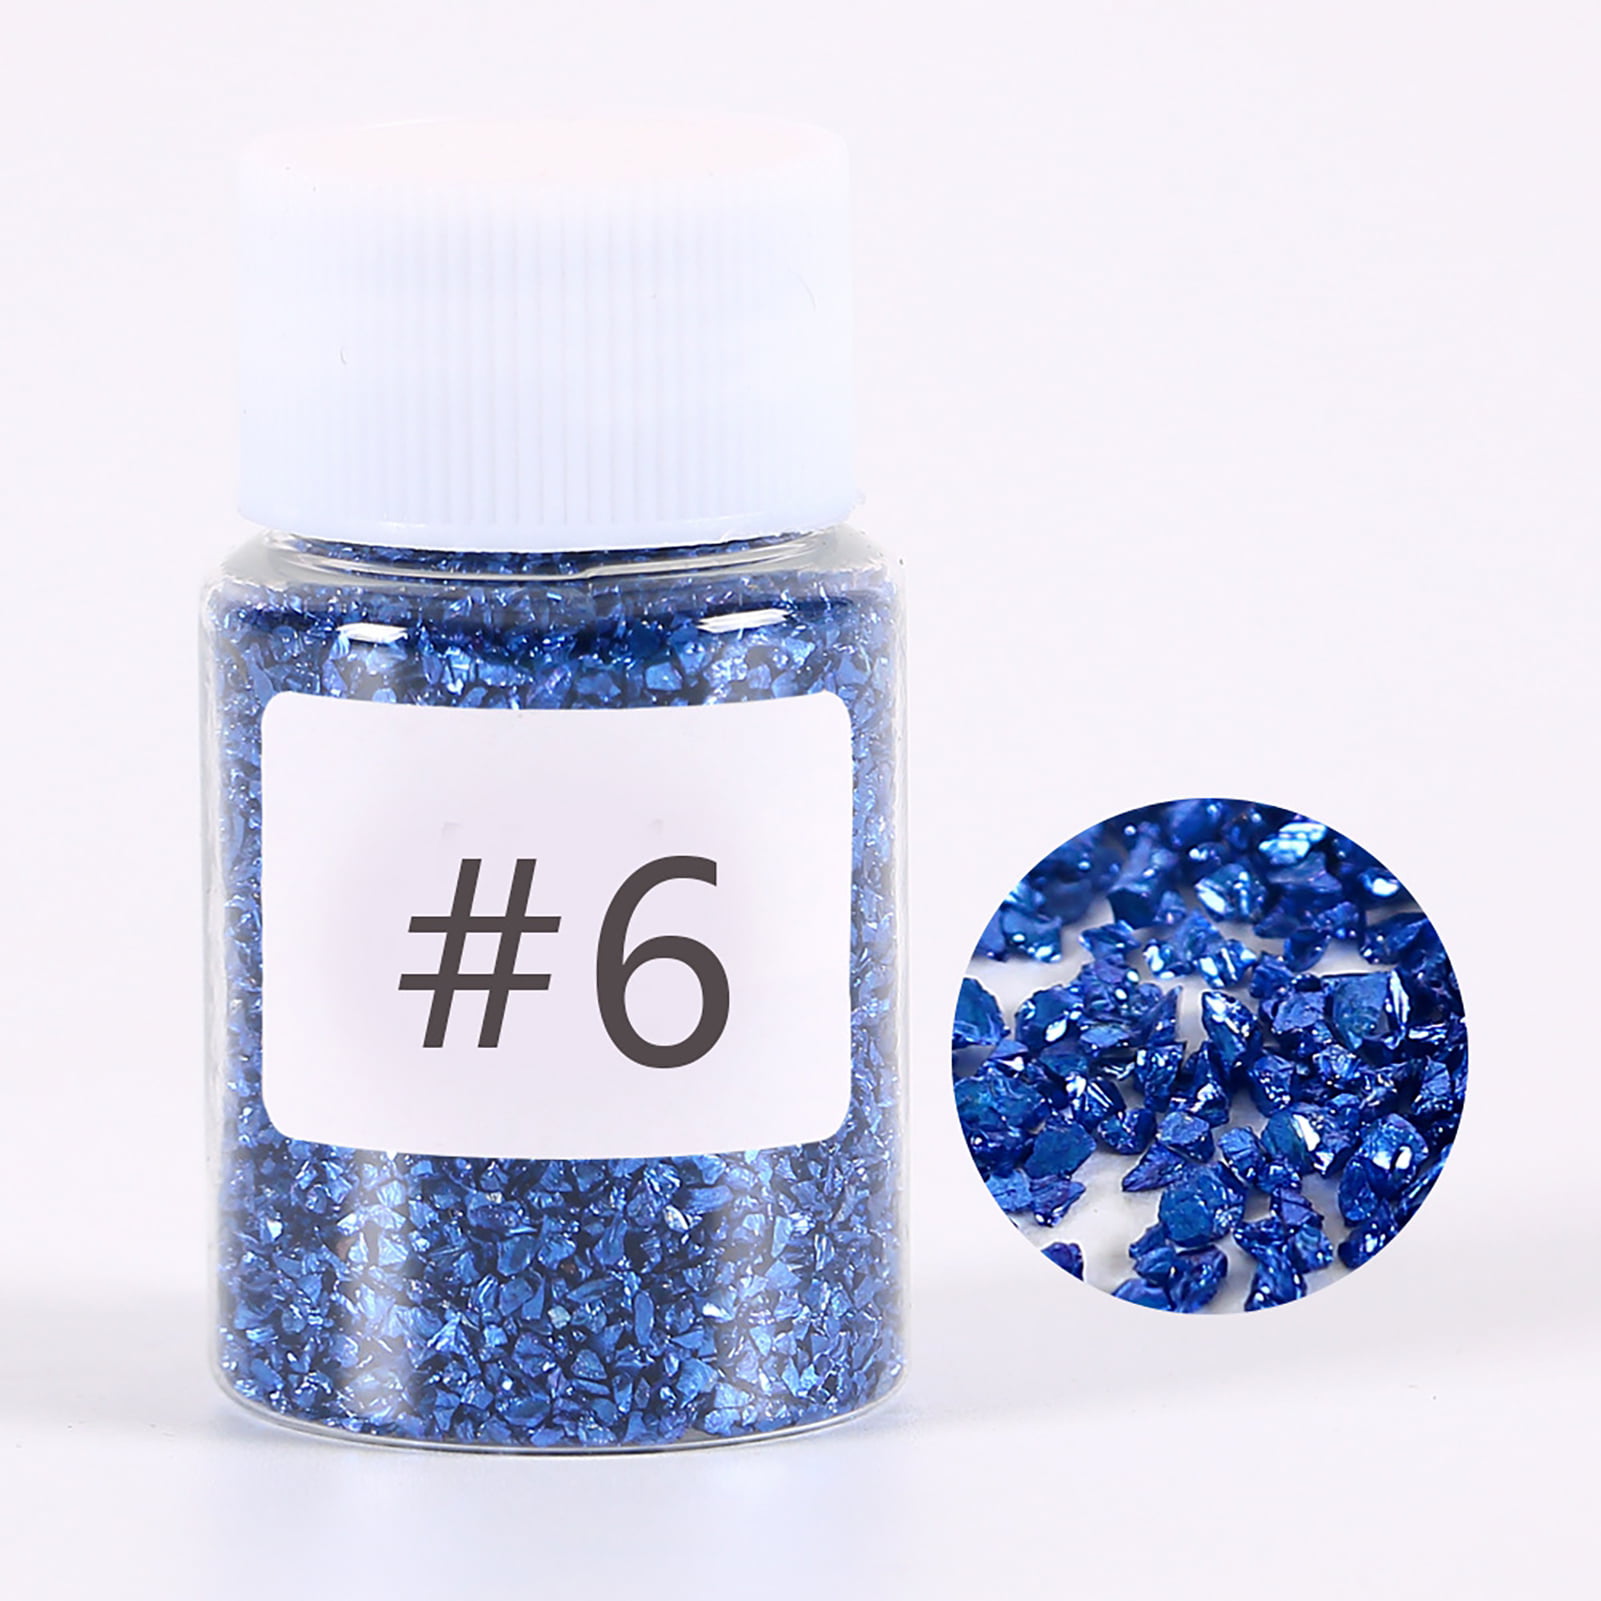 Syedra Crushed Glass for Crafts, Resin Art,Set of 3, Crushed Colored Pieces  3-6mm 1LB (Blue)